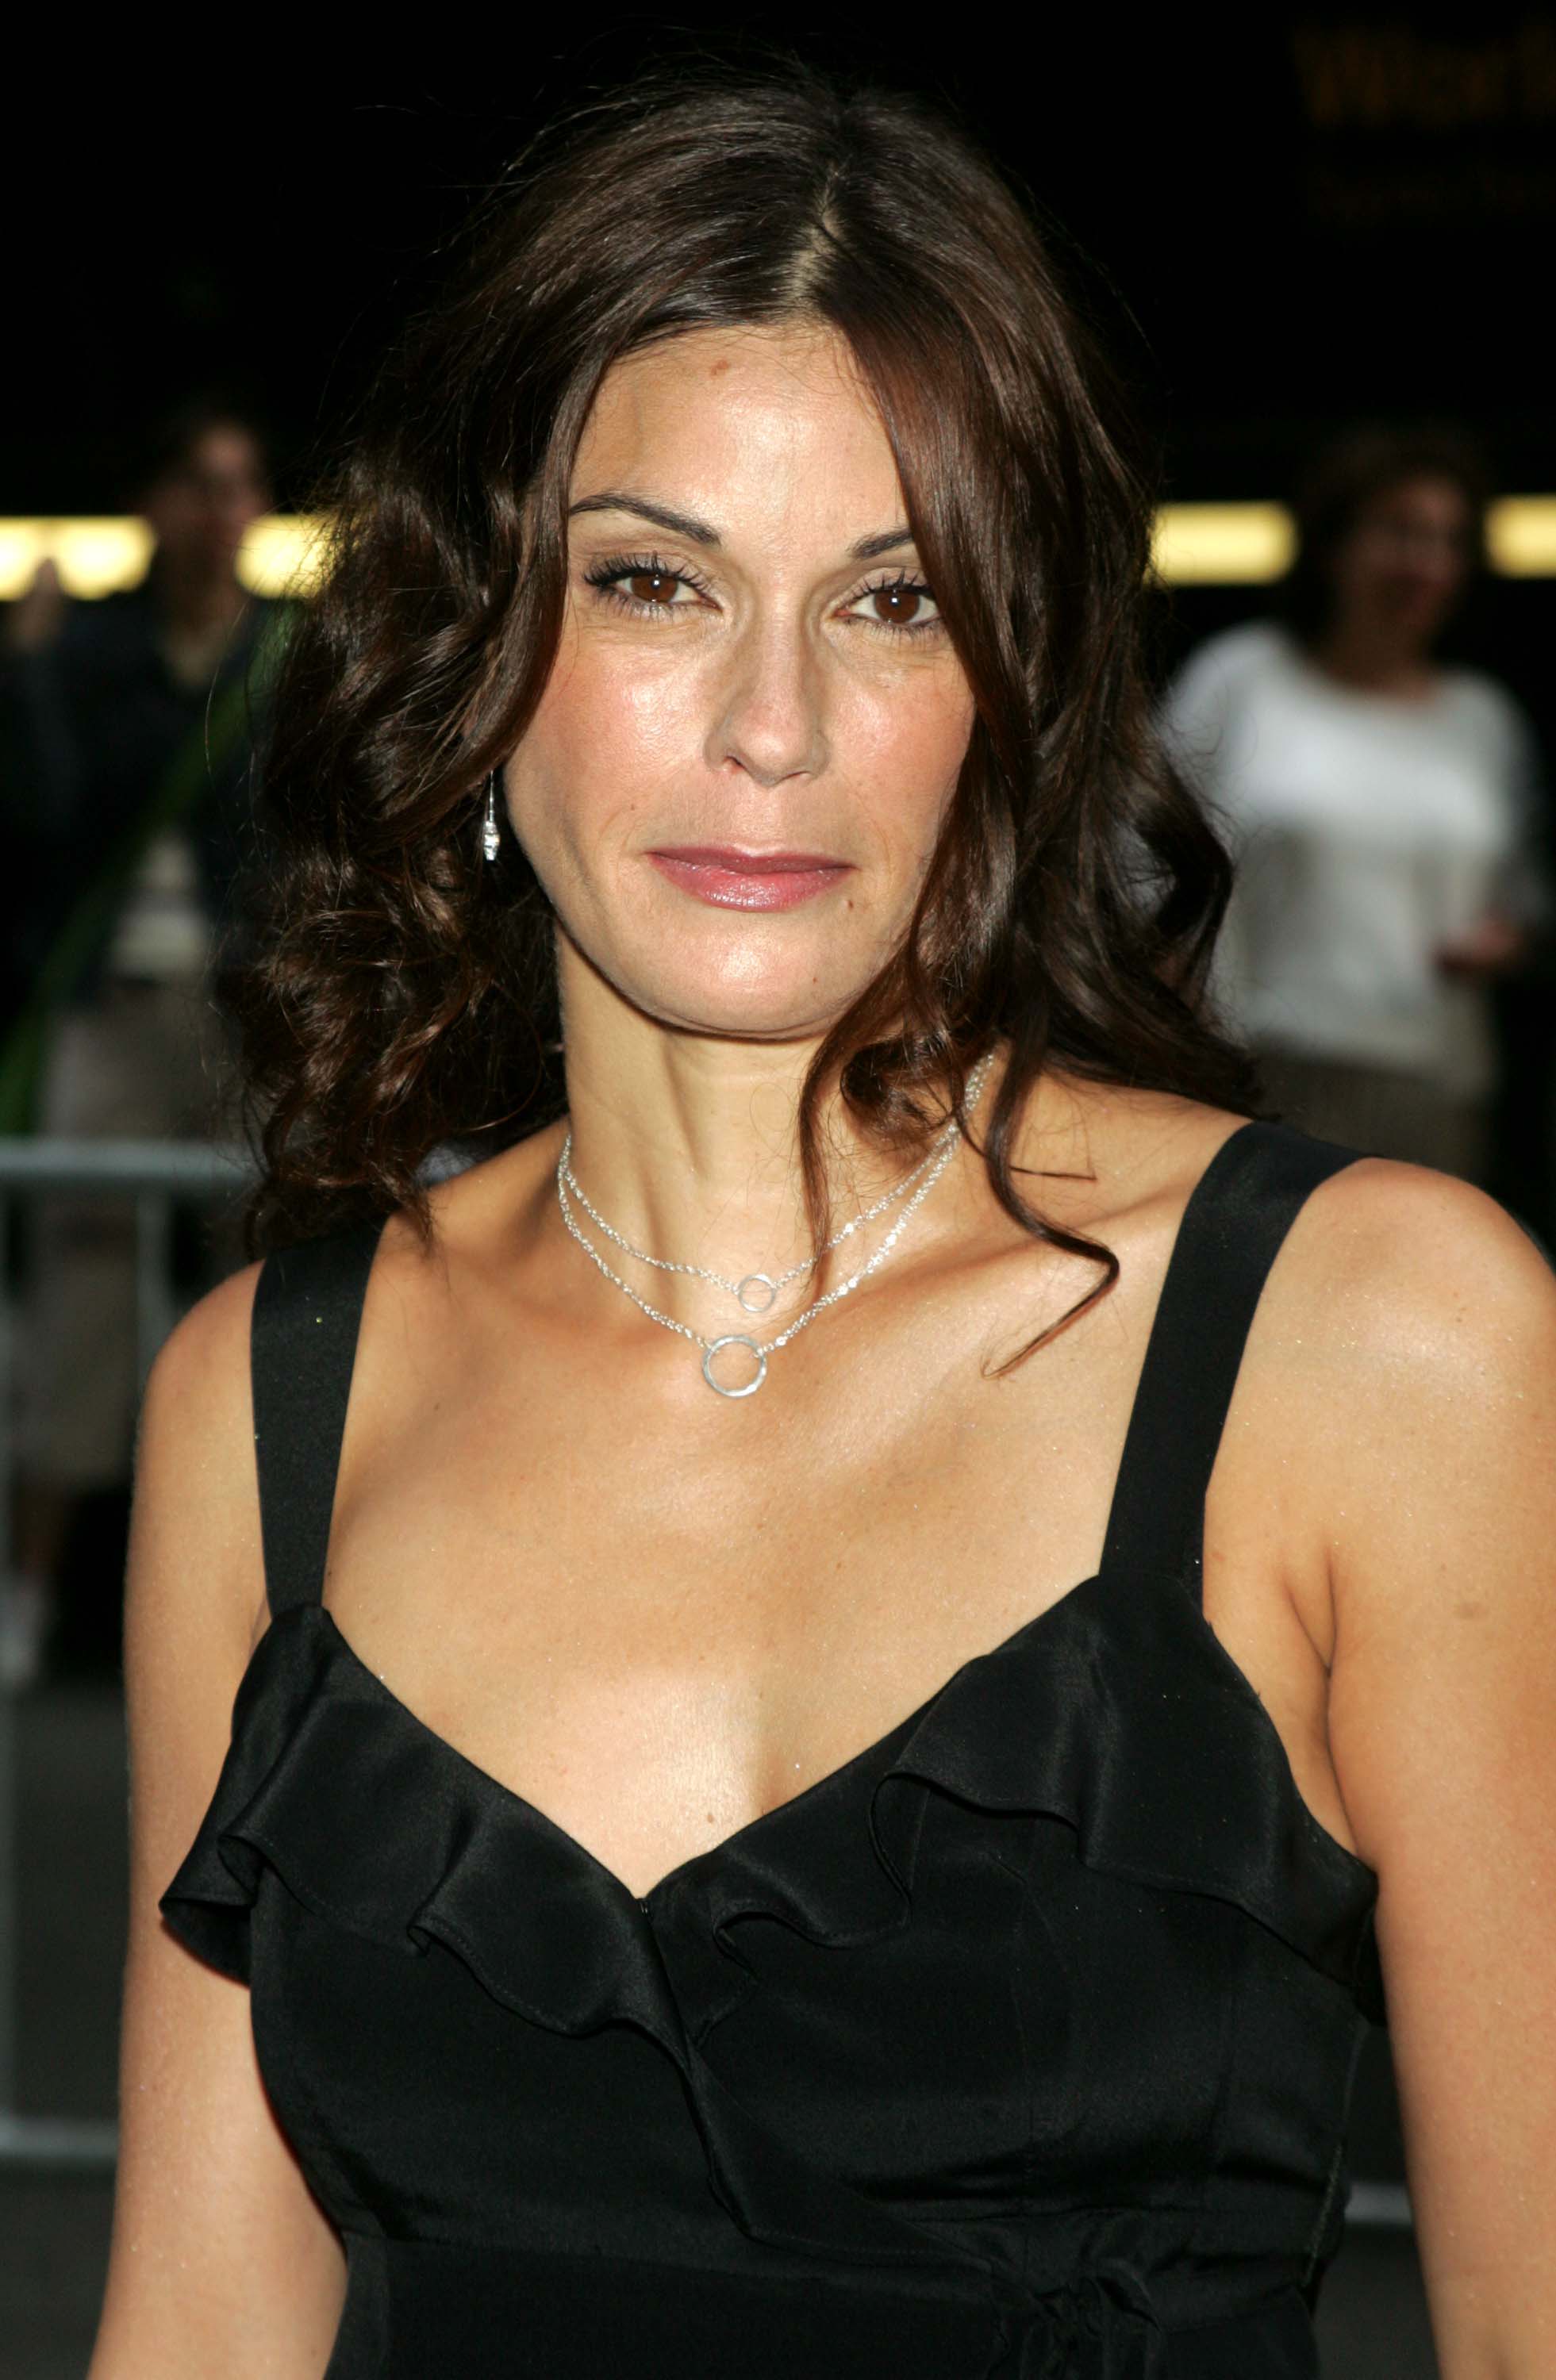 Teri Hatcher during ABC 2004-2005 Upfront at Cipriani's on May 18, 2004 in New York City. | Source: Getty Images